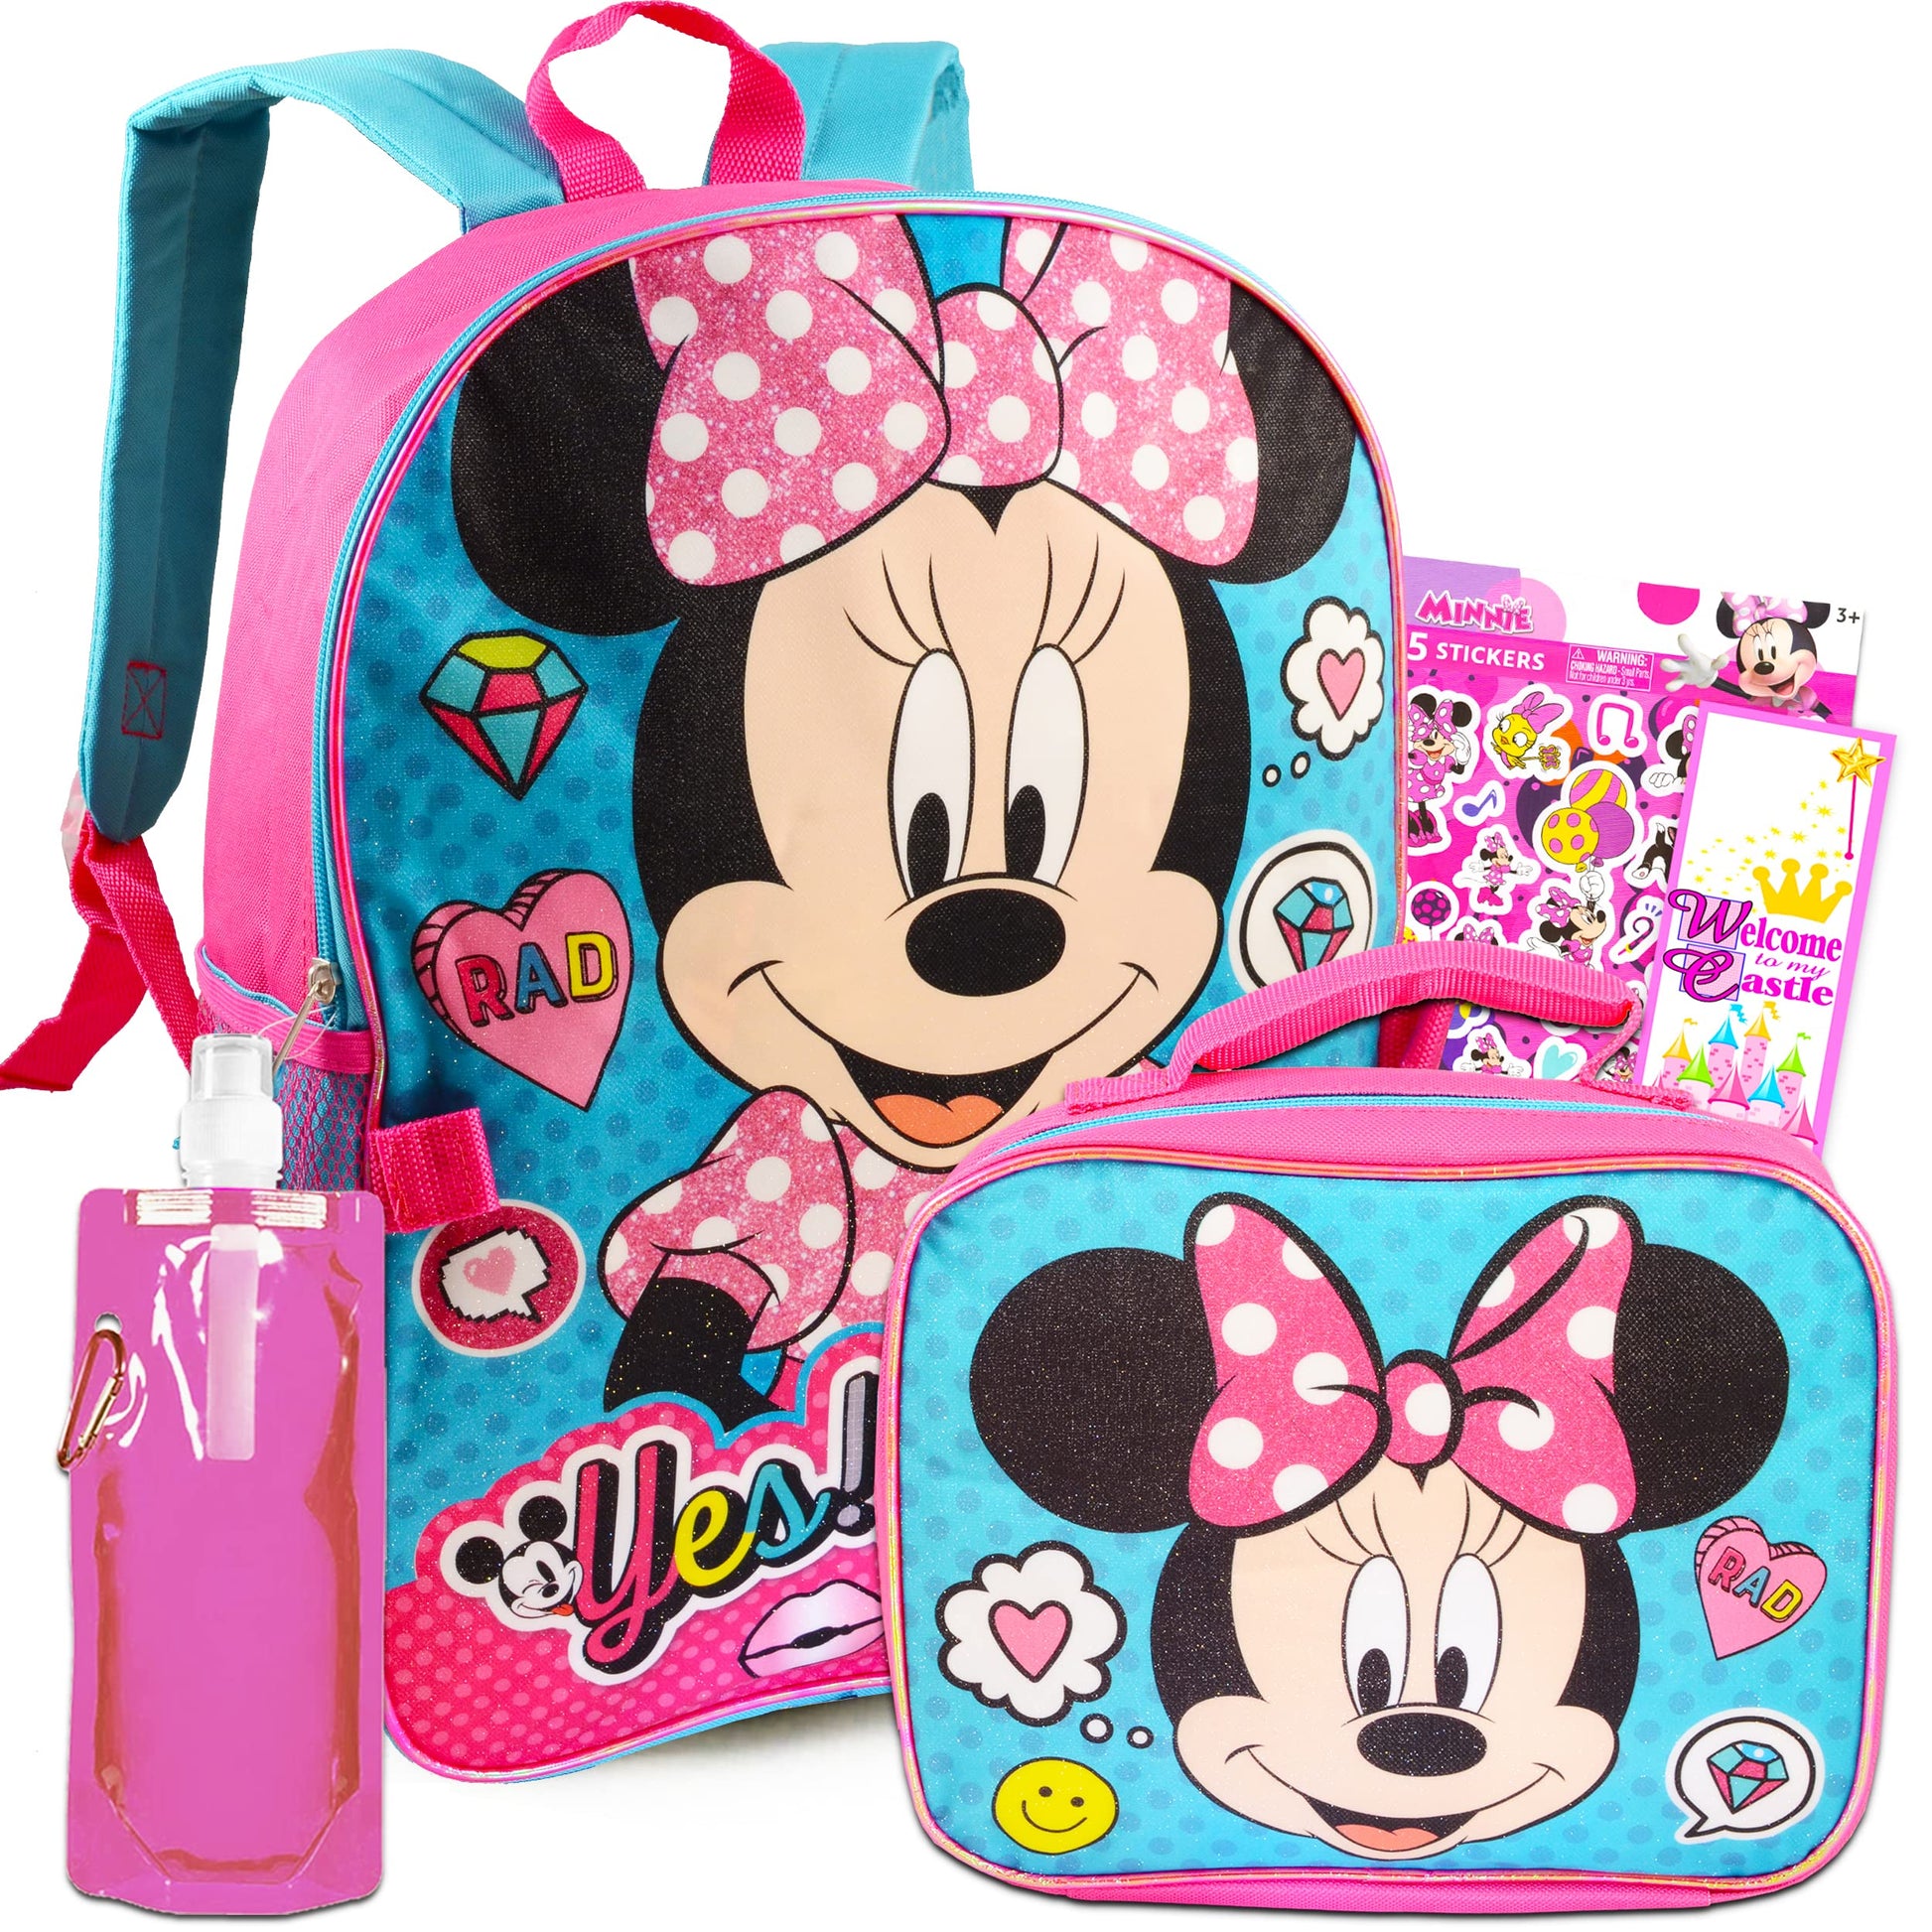 Disney Minnie Mouse Backpack with Lunch Box for Girls 5 Pc Bundle (Minnie Mouse School Supplies)